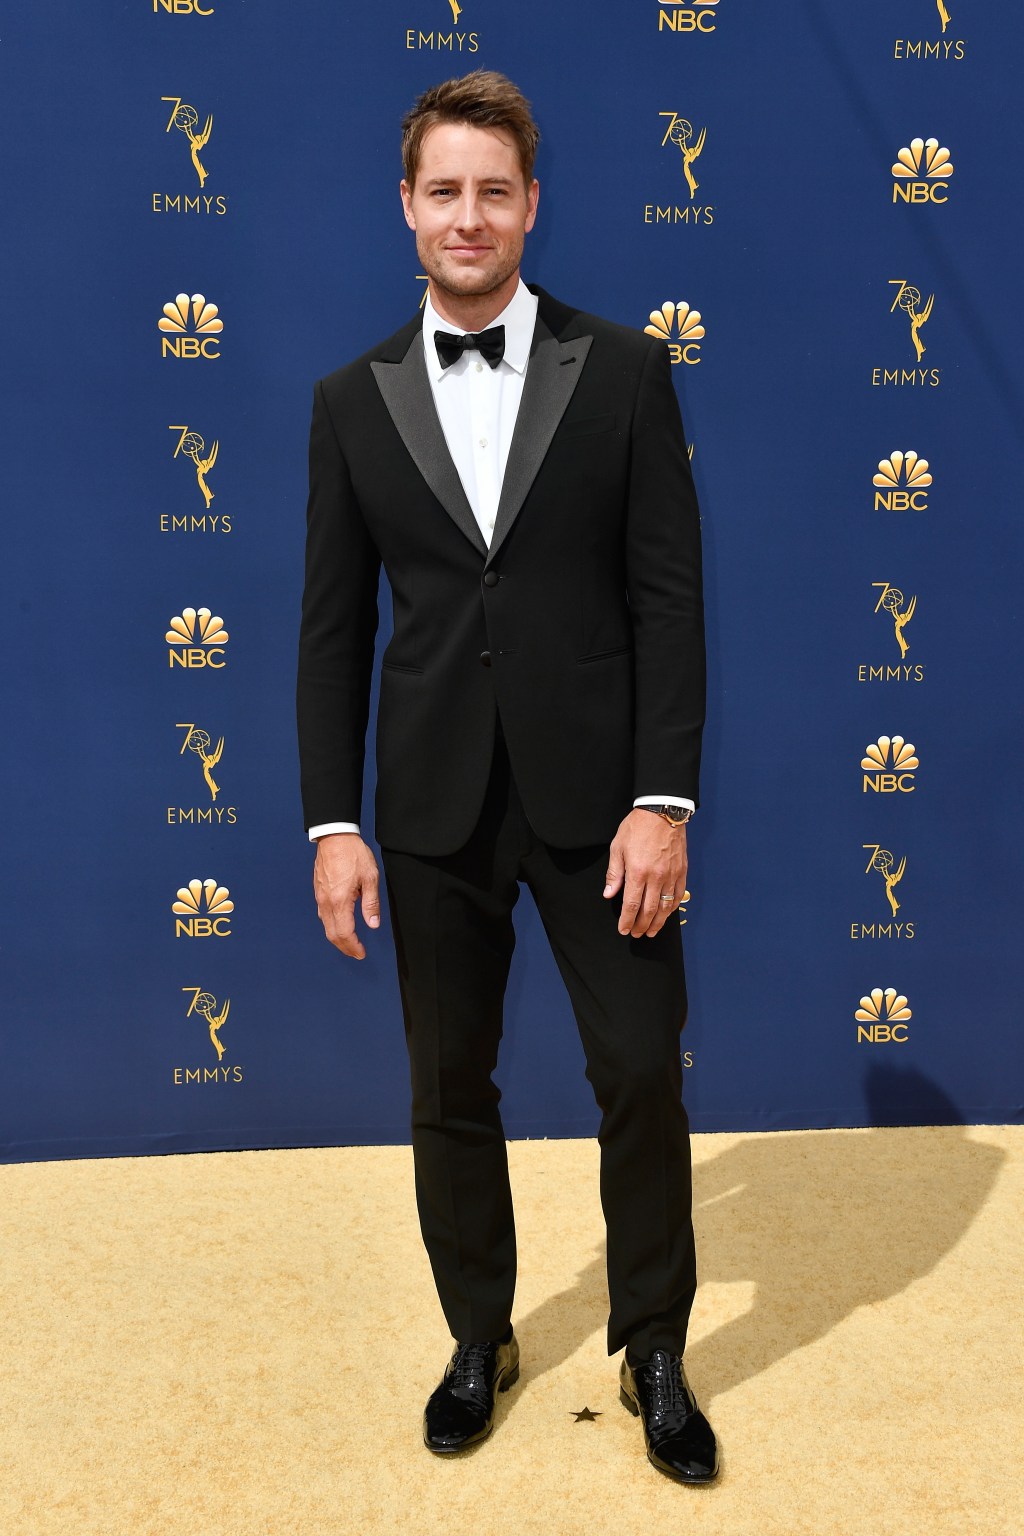 Justin Hartley attends the 70th Emmy Awards